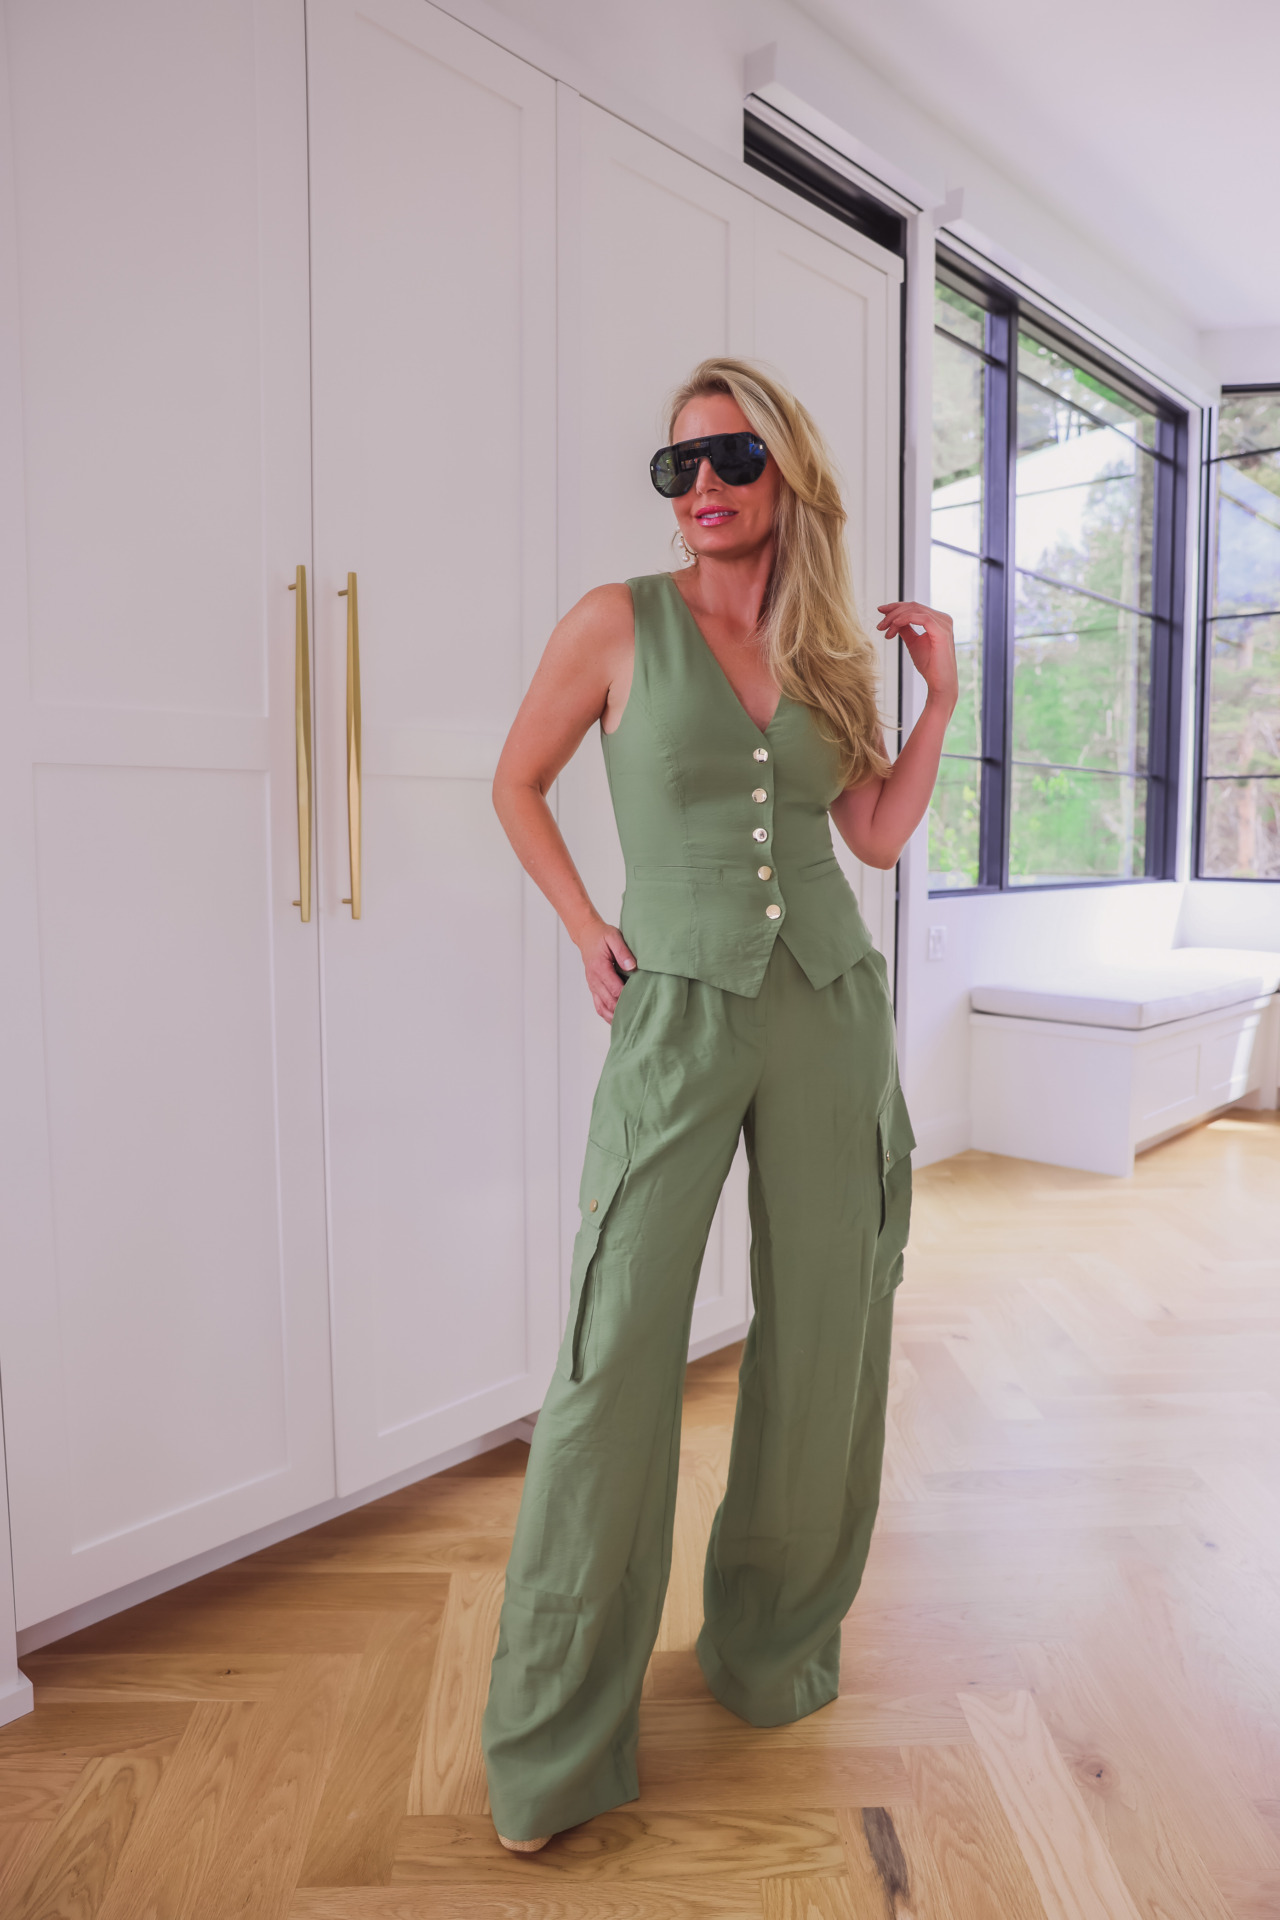 Green Pants & Vest Monochrome Outfits For Summer